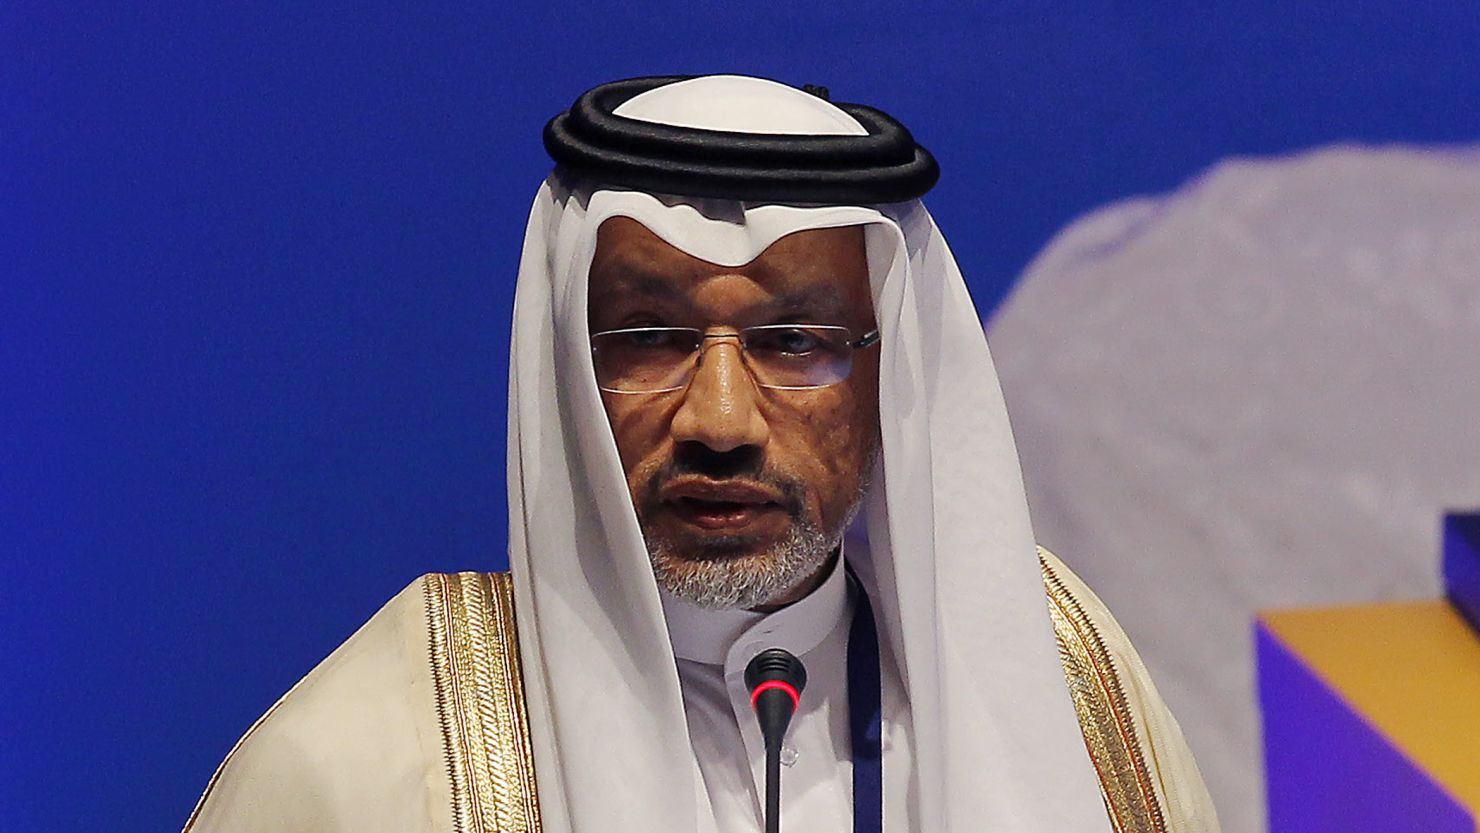 Mohammed bin Hammam was a FIFA Executive Committee member and head of the Asian Football Confederation until his ban.